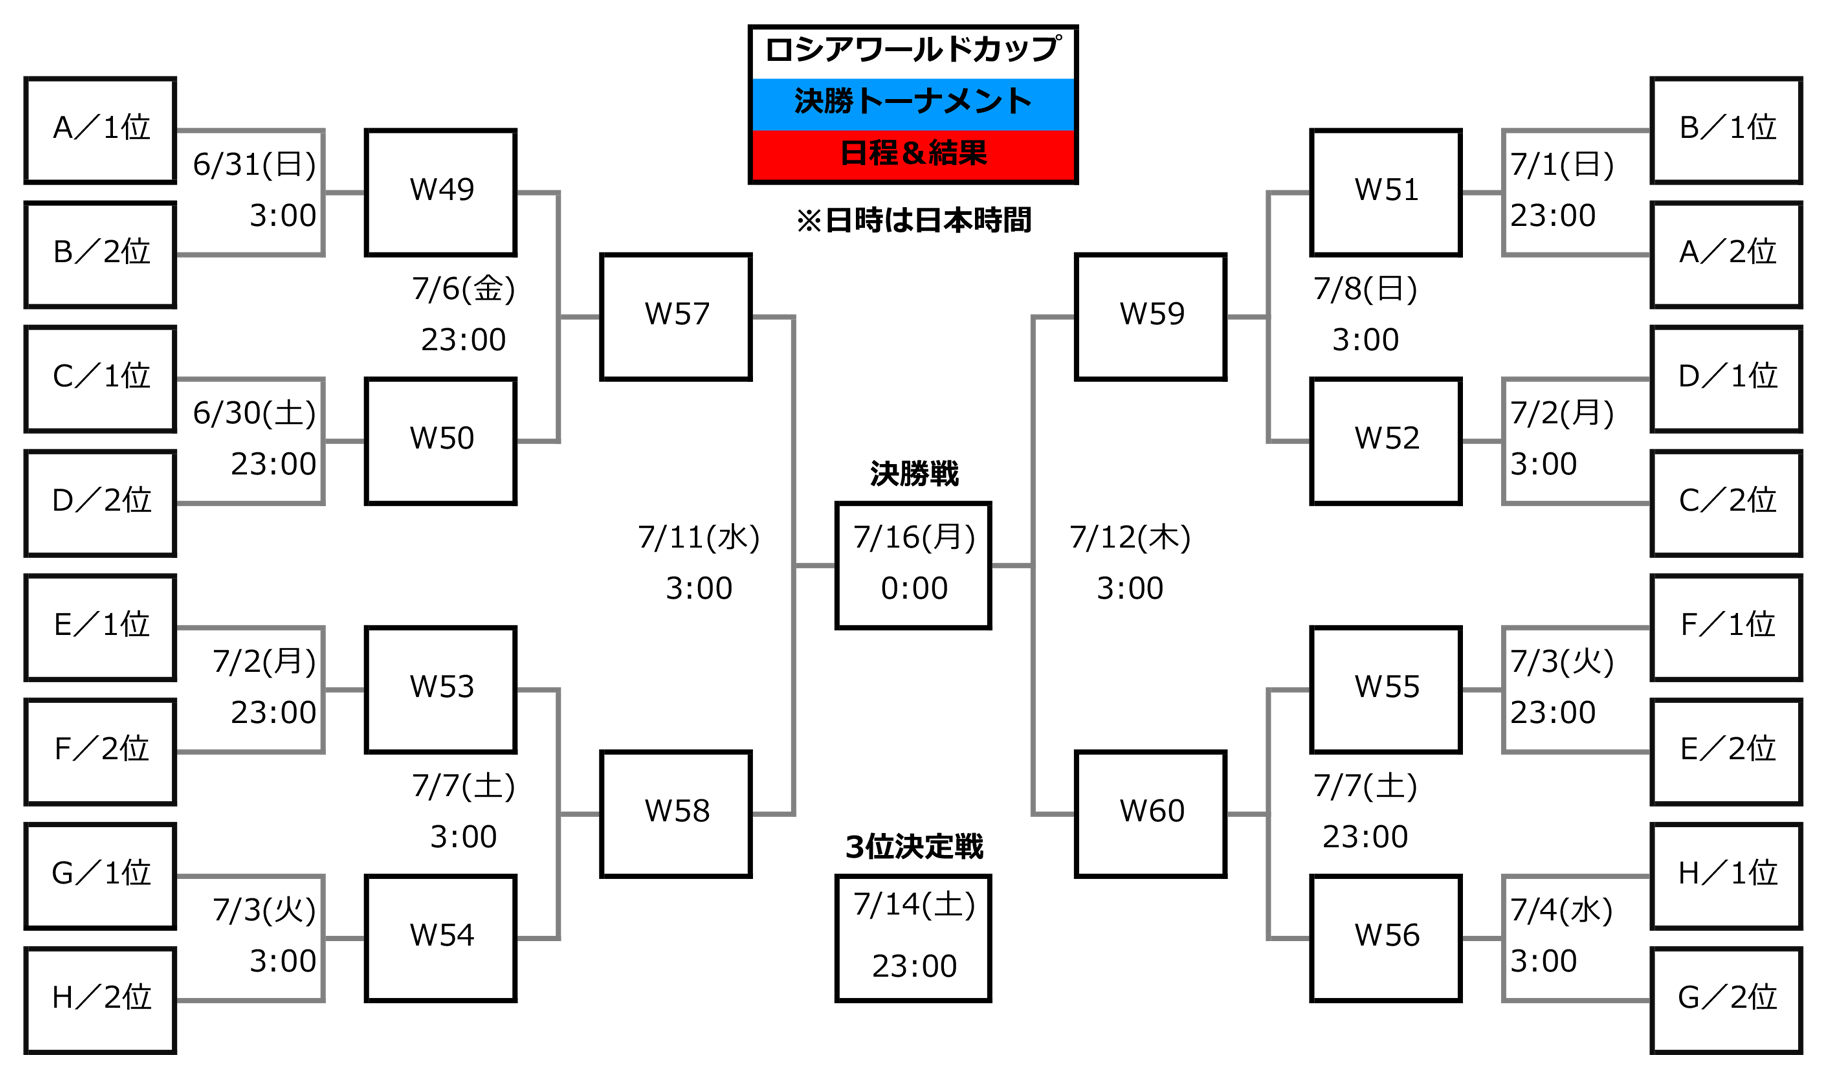 18 Fifaワールドカップ 決勝トーナメント 18 Fifa World Cup Knockout Stage Japaneseclass Jp